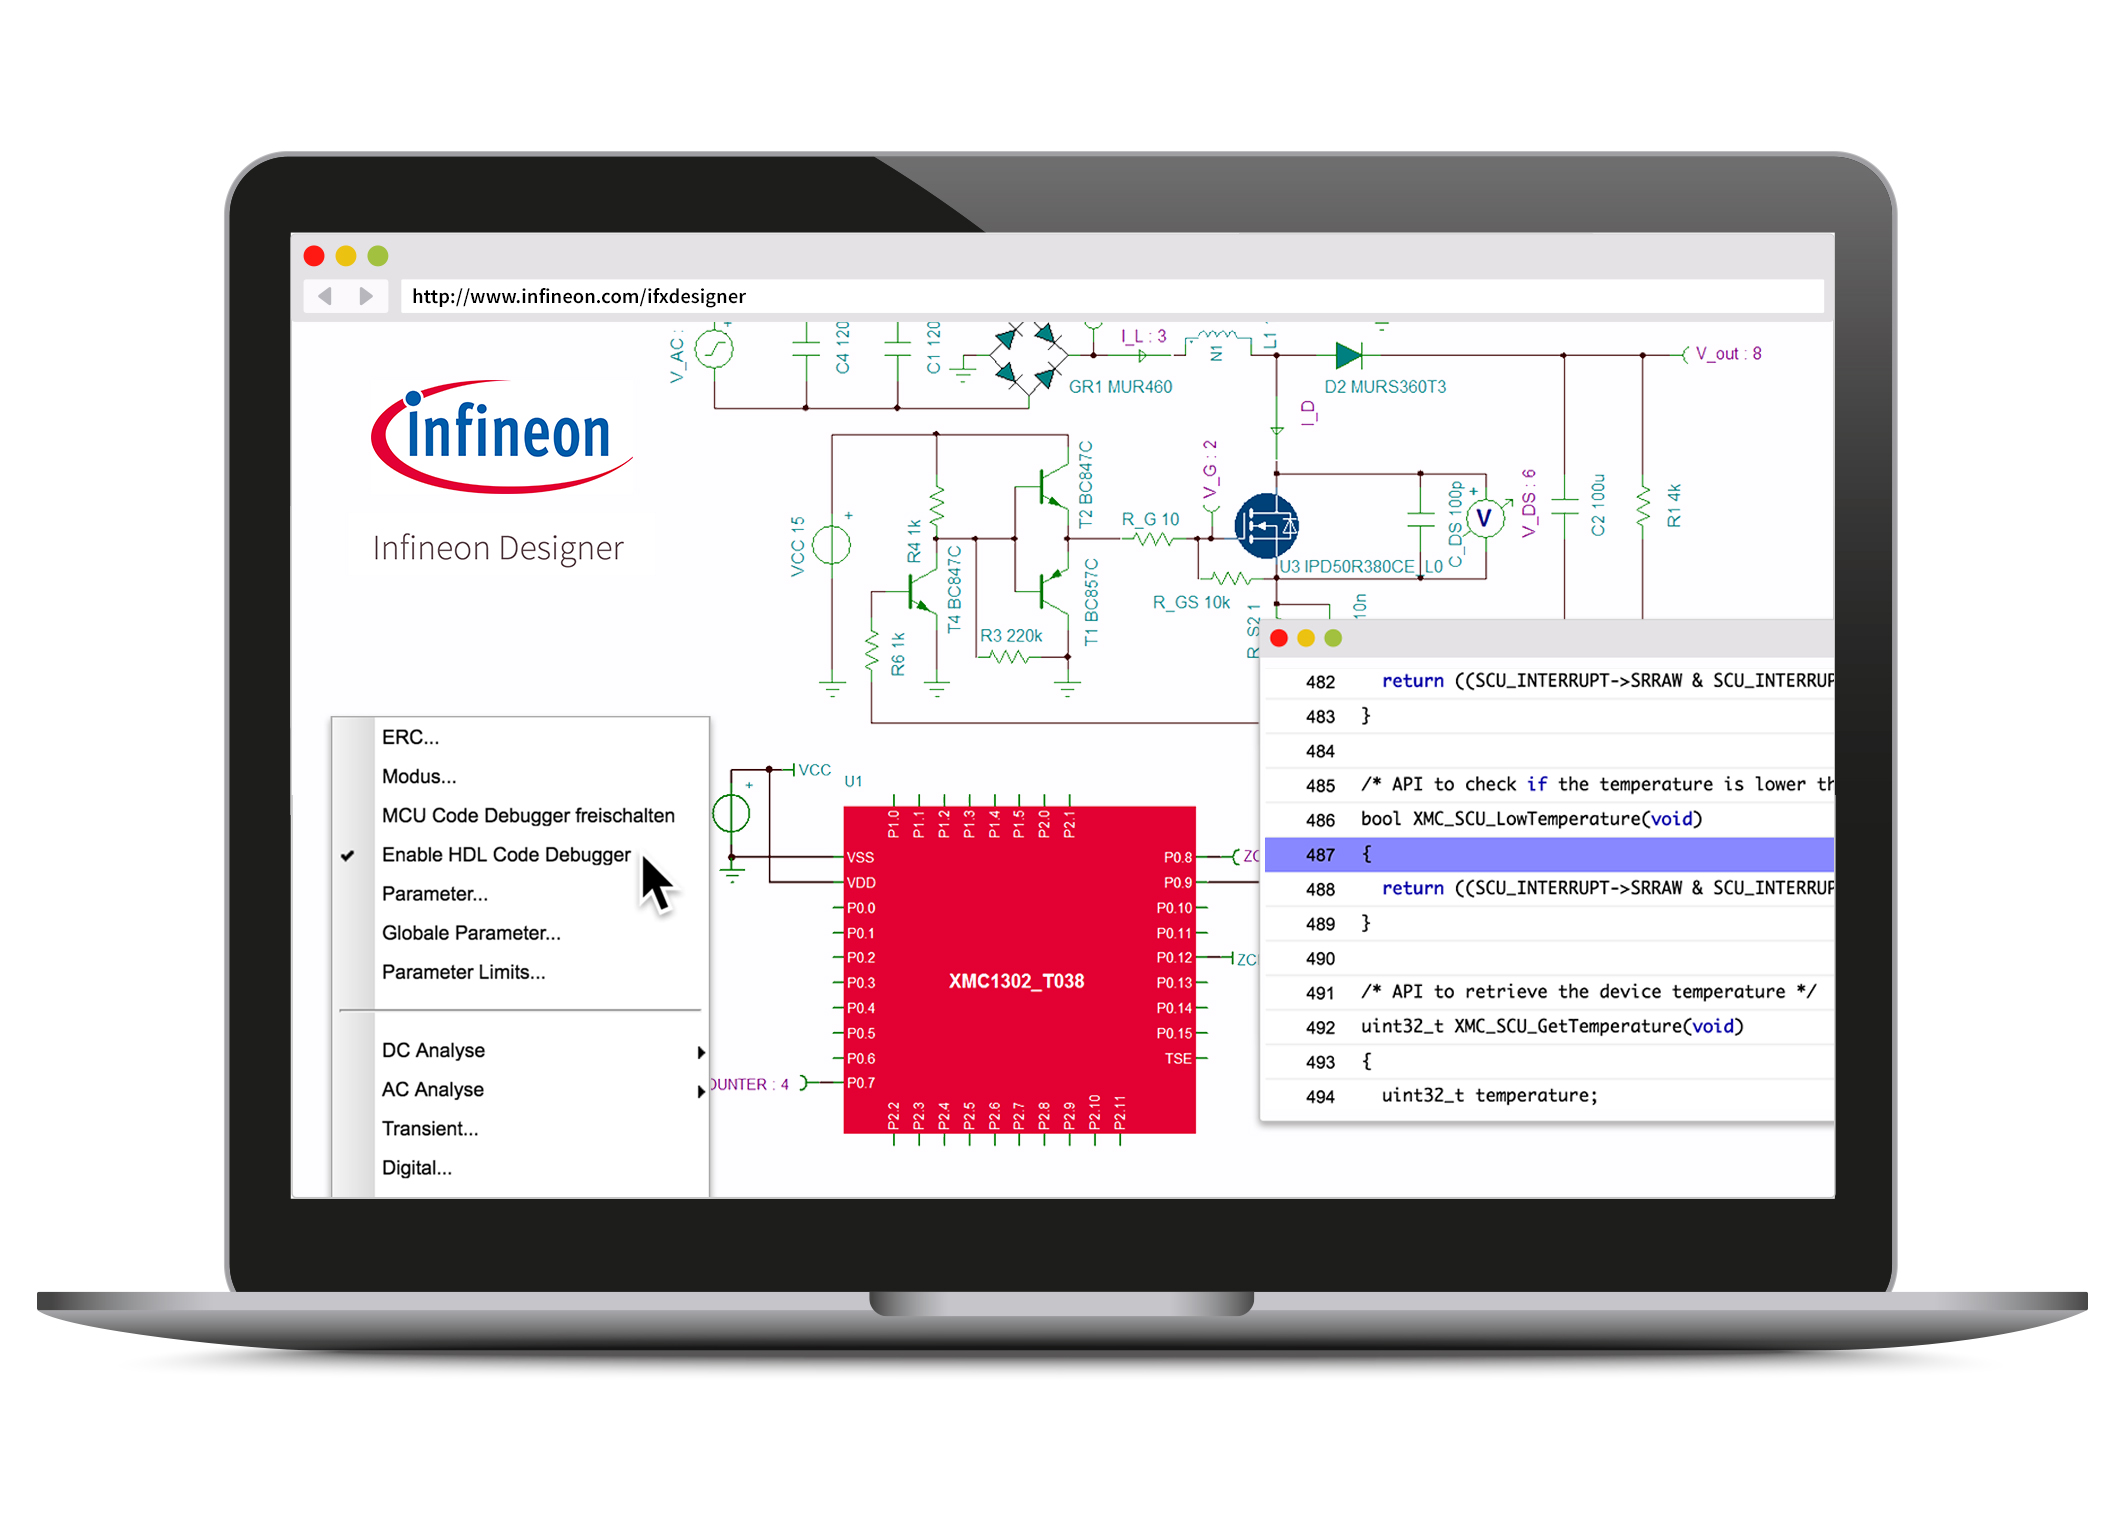 Infineon launches what it claims is the first-of-its-kind online engineering prototype design application